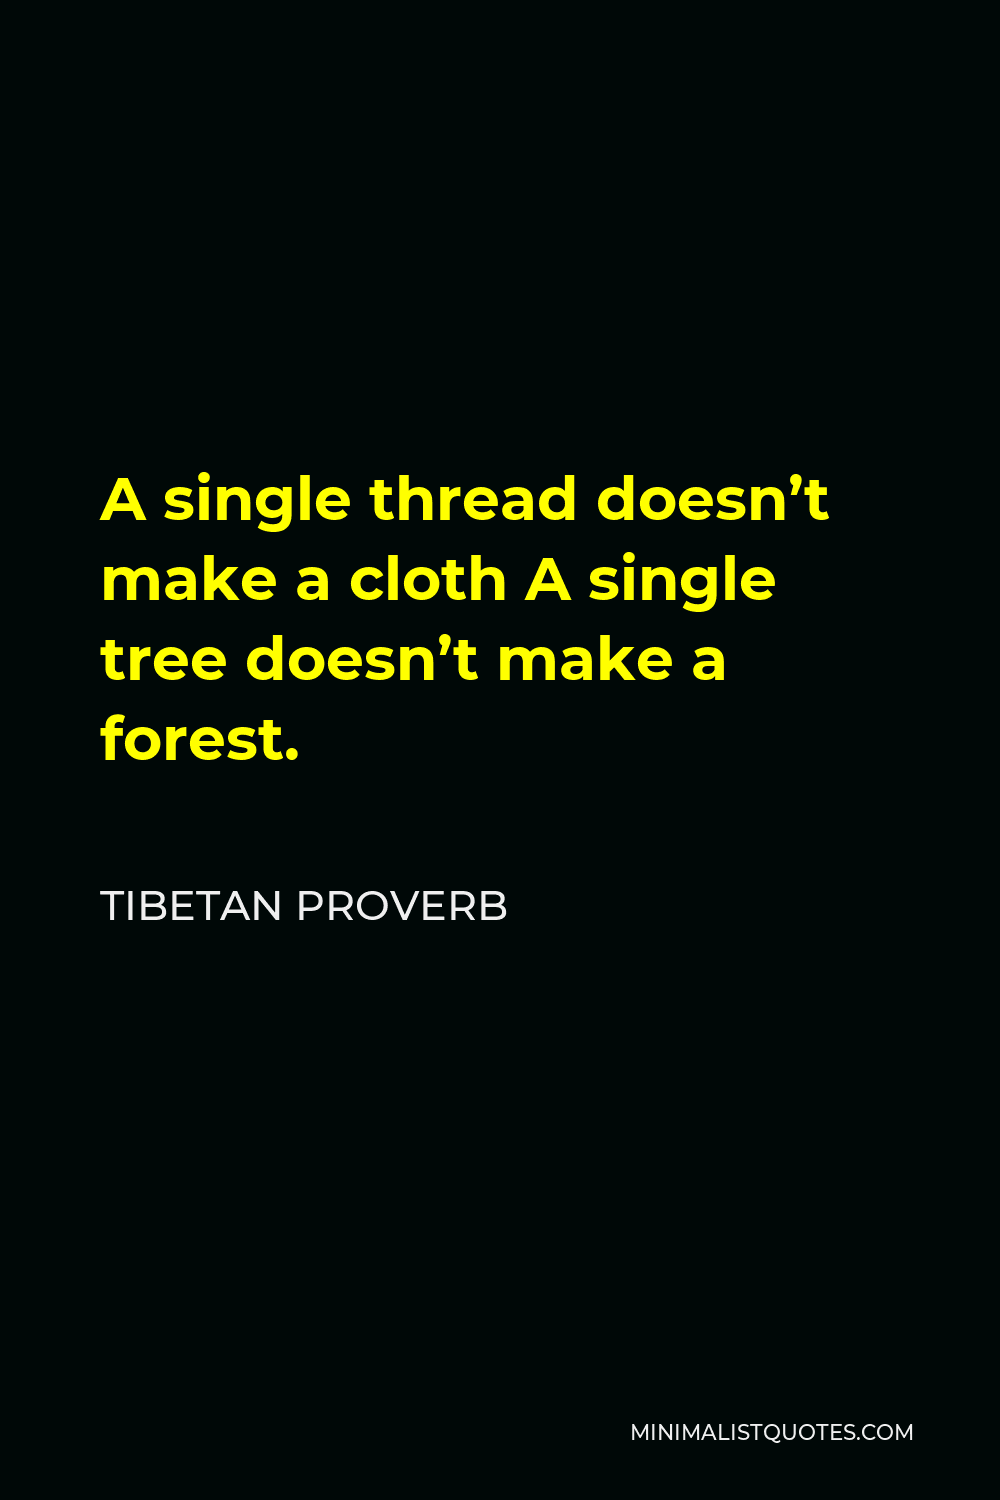 Tibetan Proverb Quote - A single thread doesn’t make a cloth A single tree doesn’t make a forest